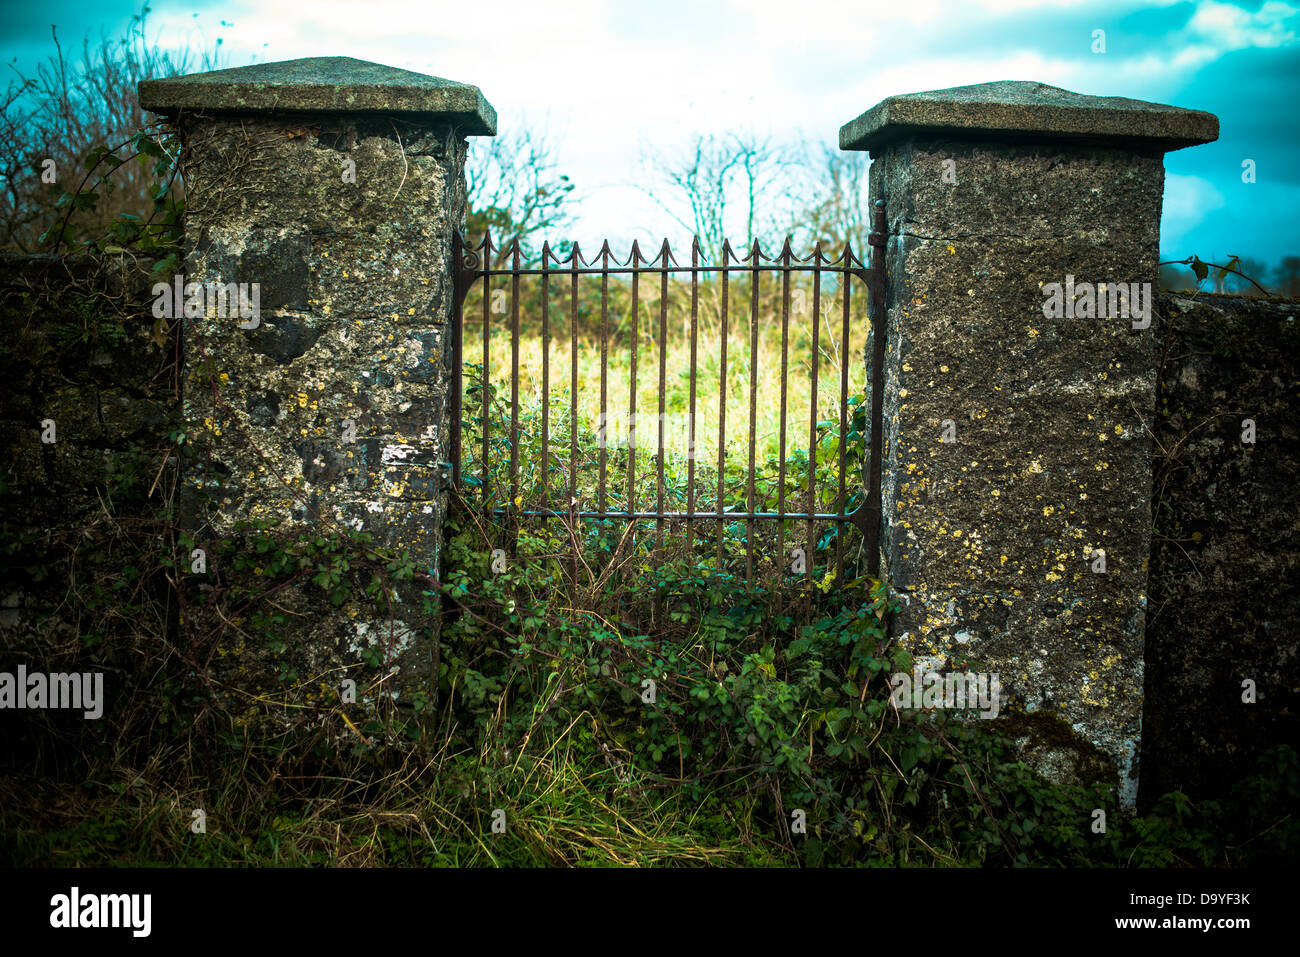 Old gate entrance to walled estate, with original wrought iron gate. Stock Photo